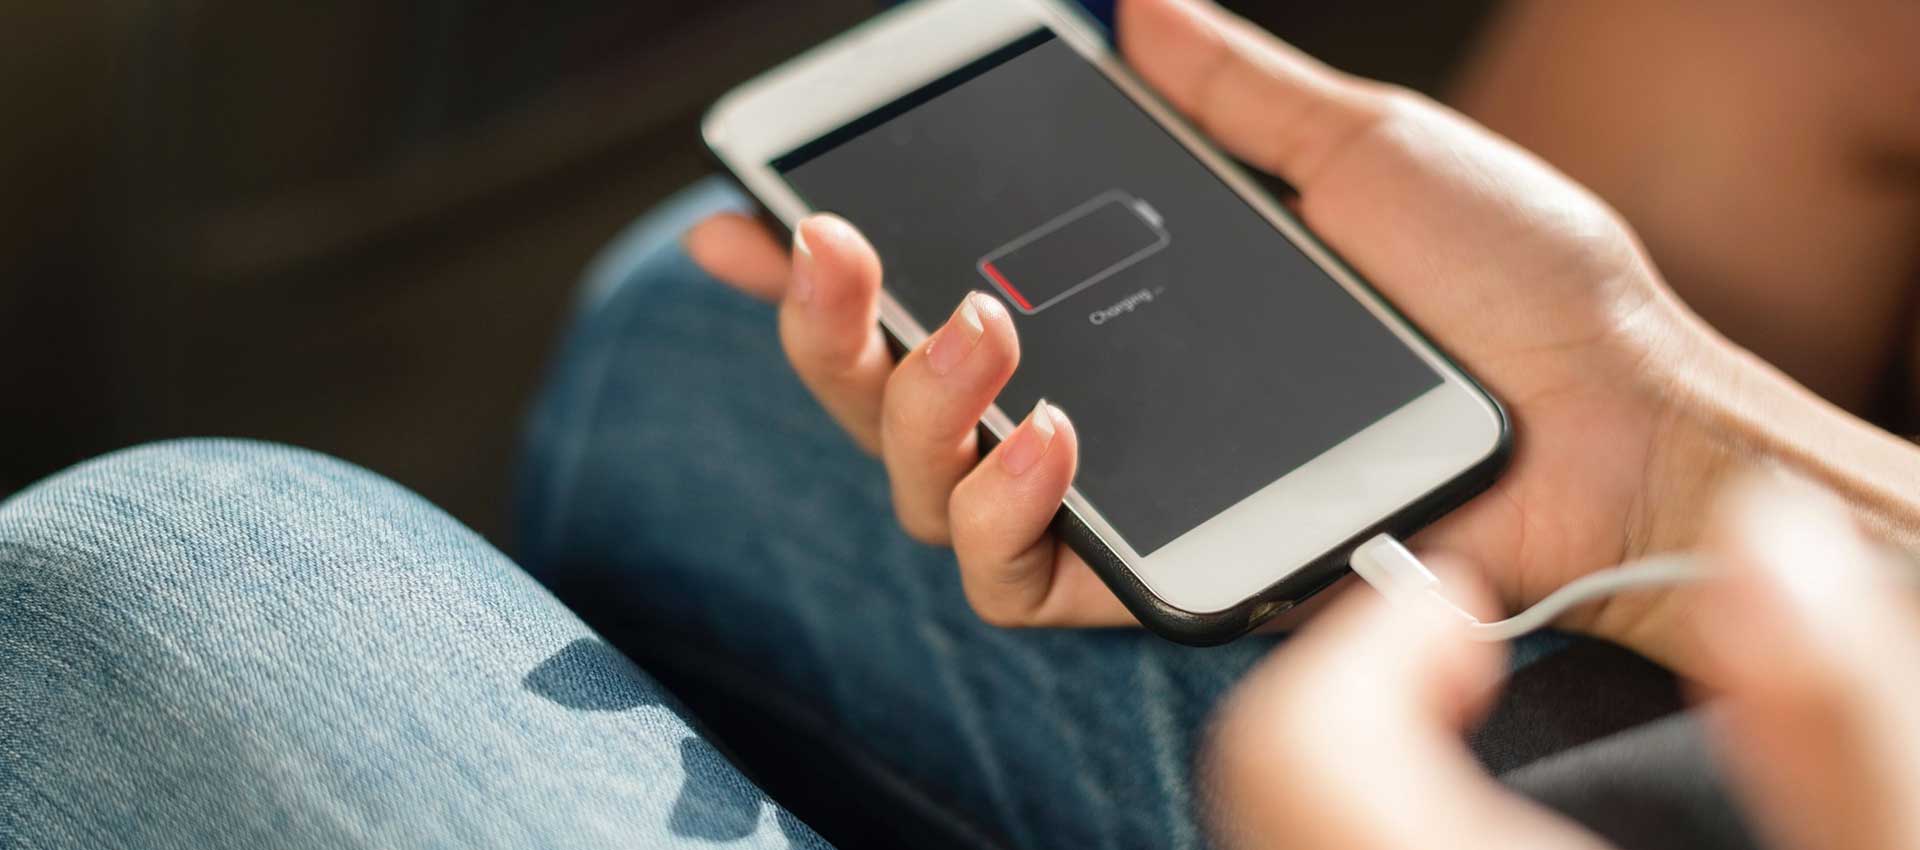 How to Save Your Smartphone's Battery?